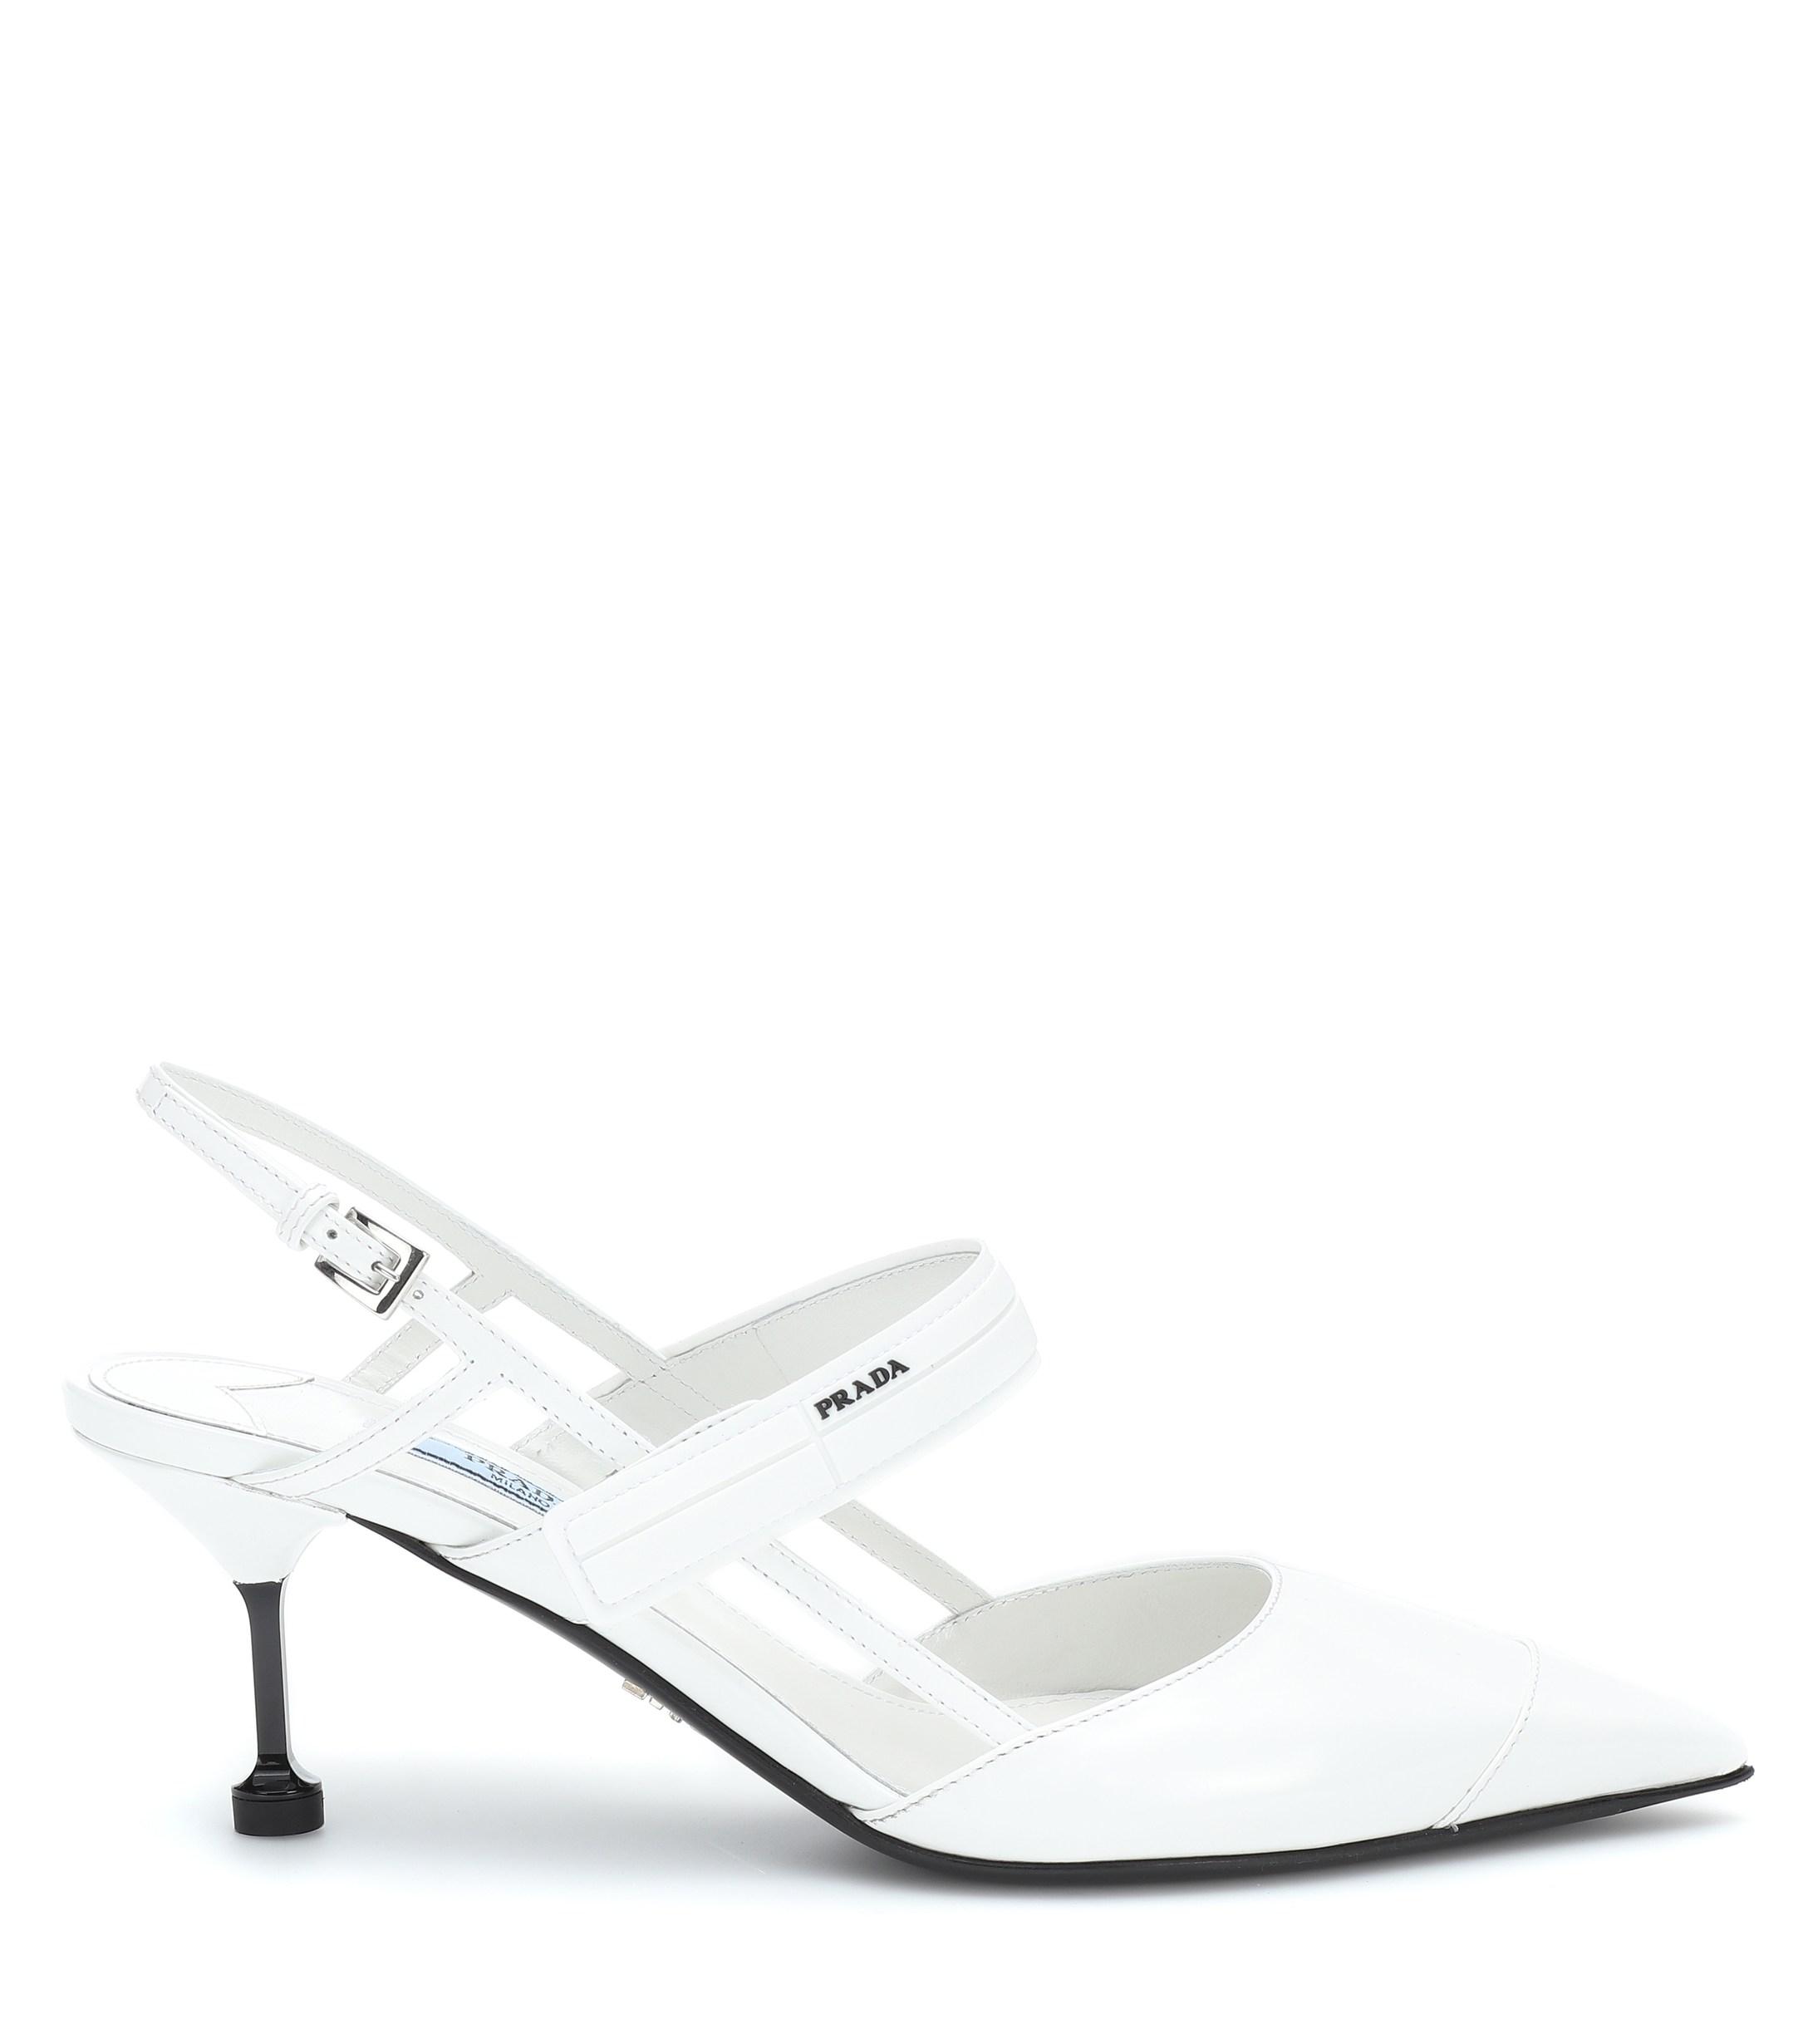 Prada Leather Slingback Pumps in White - Save 22% | Lyst